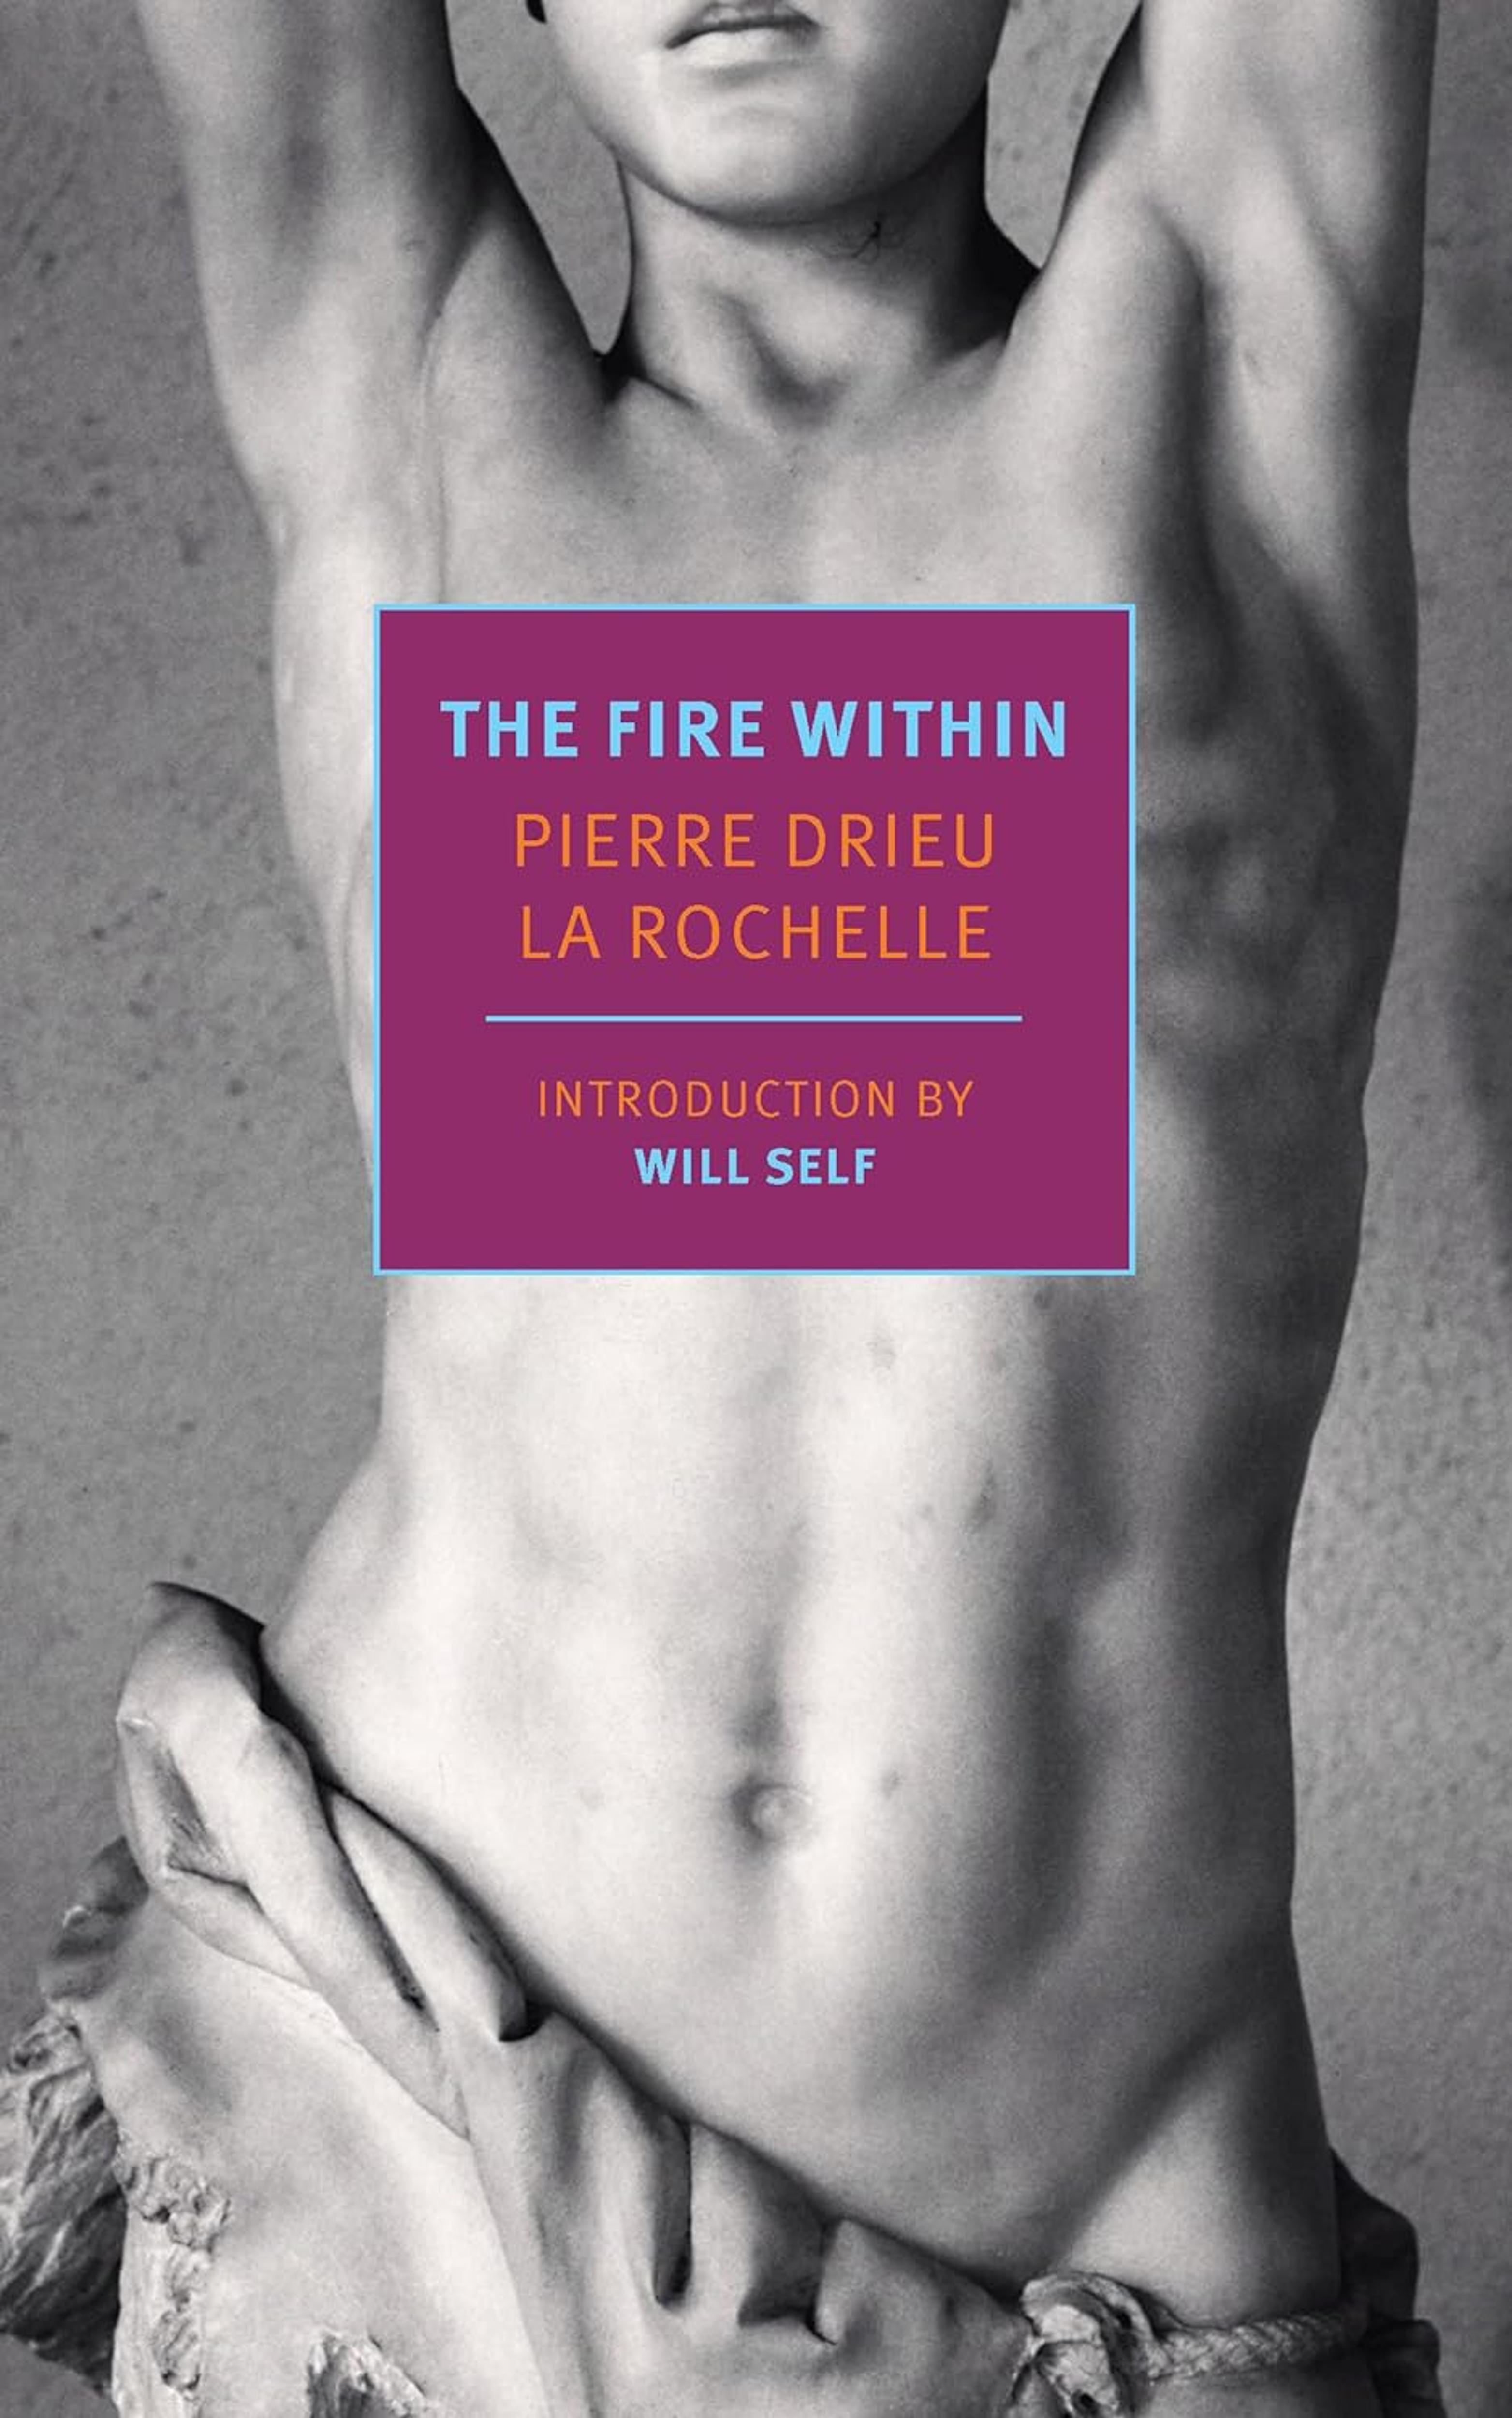 Decadent Masculinity: On Pierre Drieu La Rochelle’s “The Fire Within”